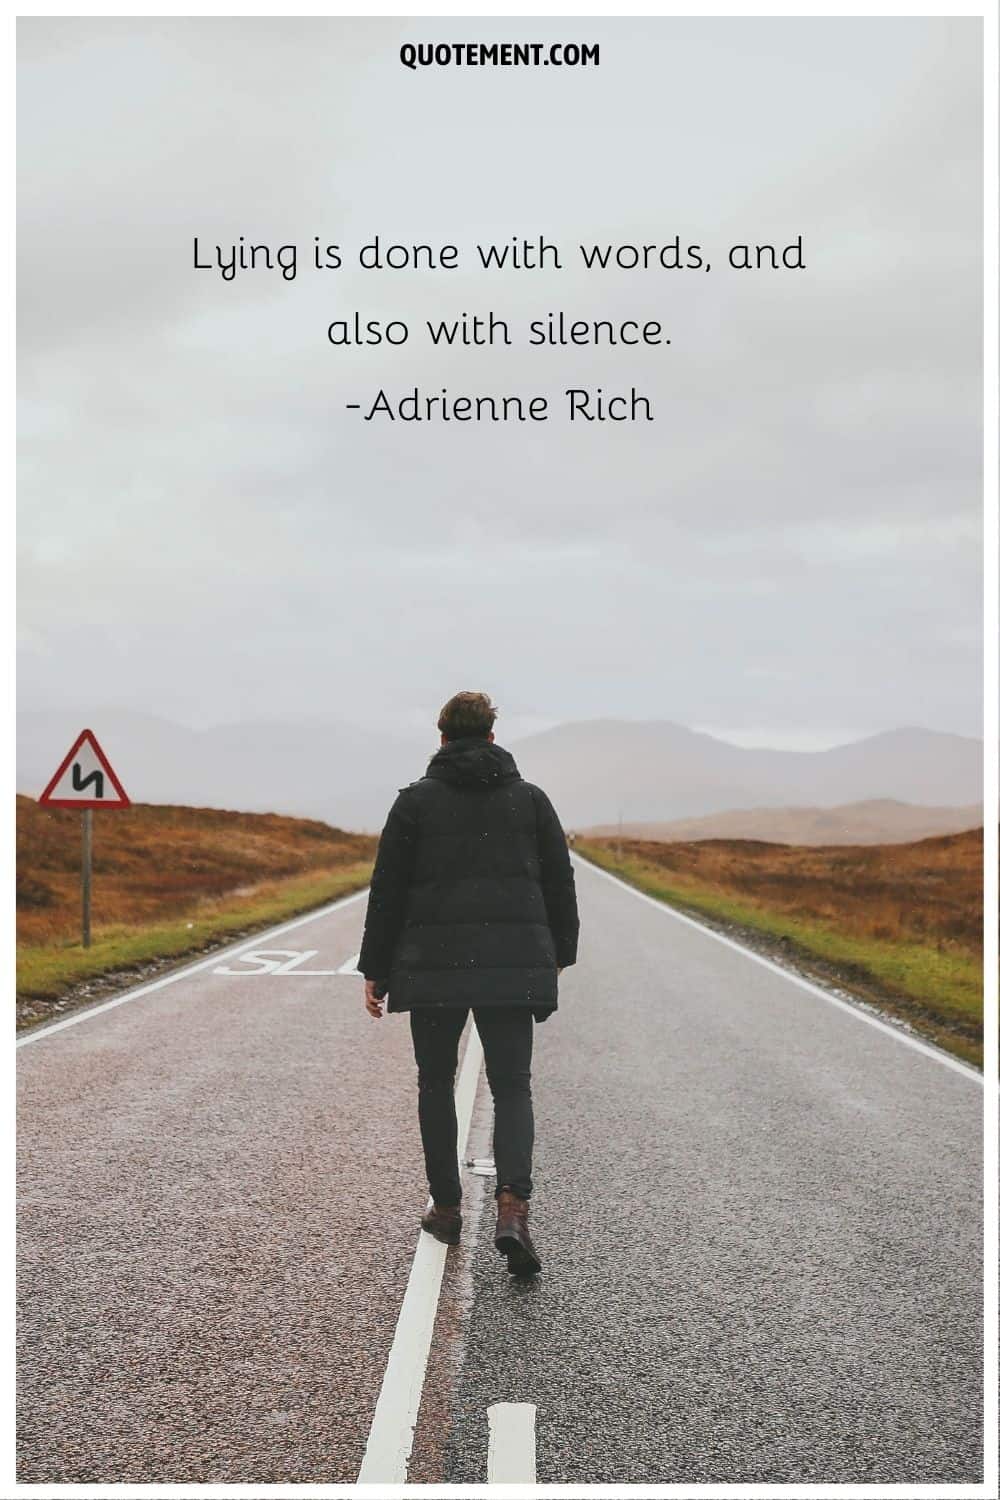 “Lying is done with words, and also with silence.” ― Adrienne Rich